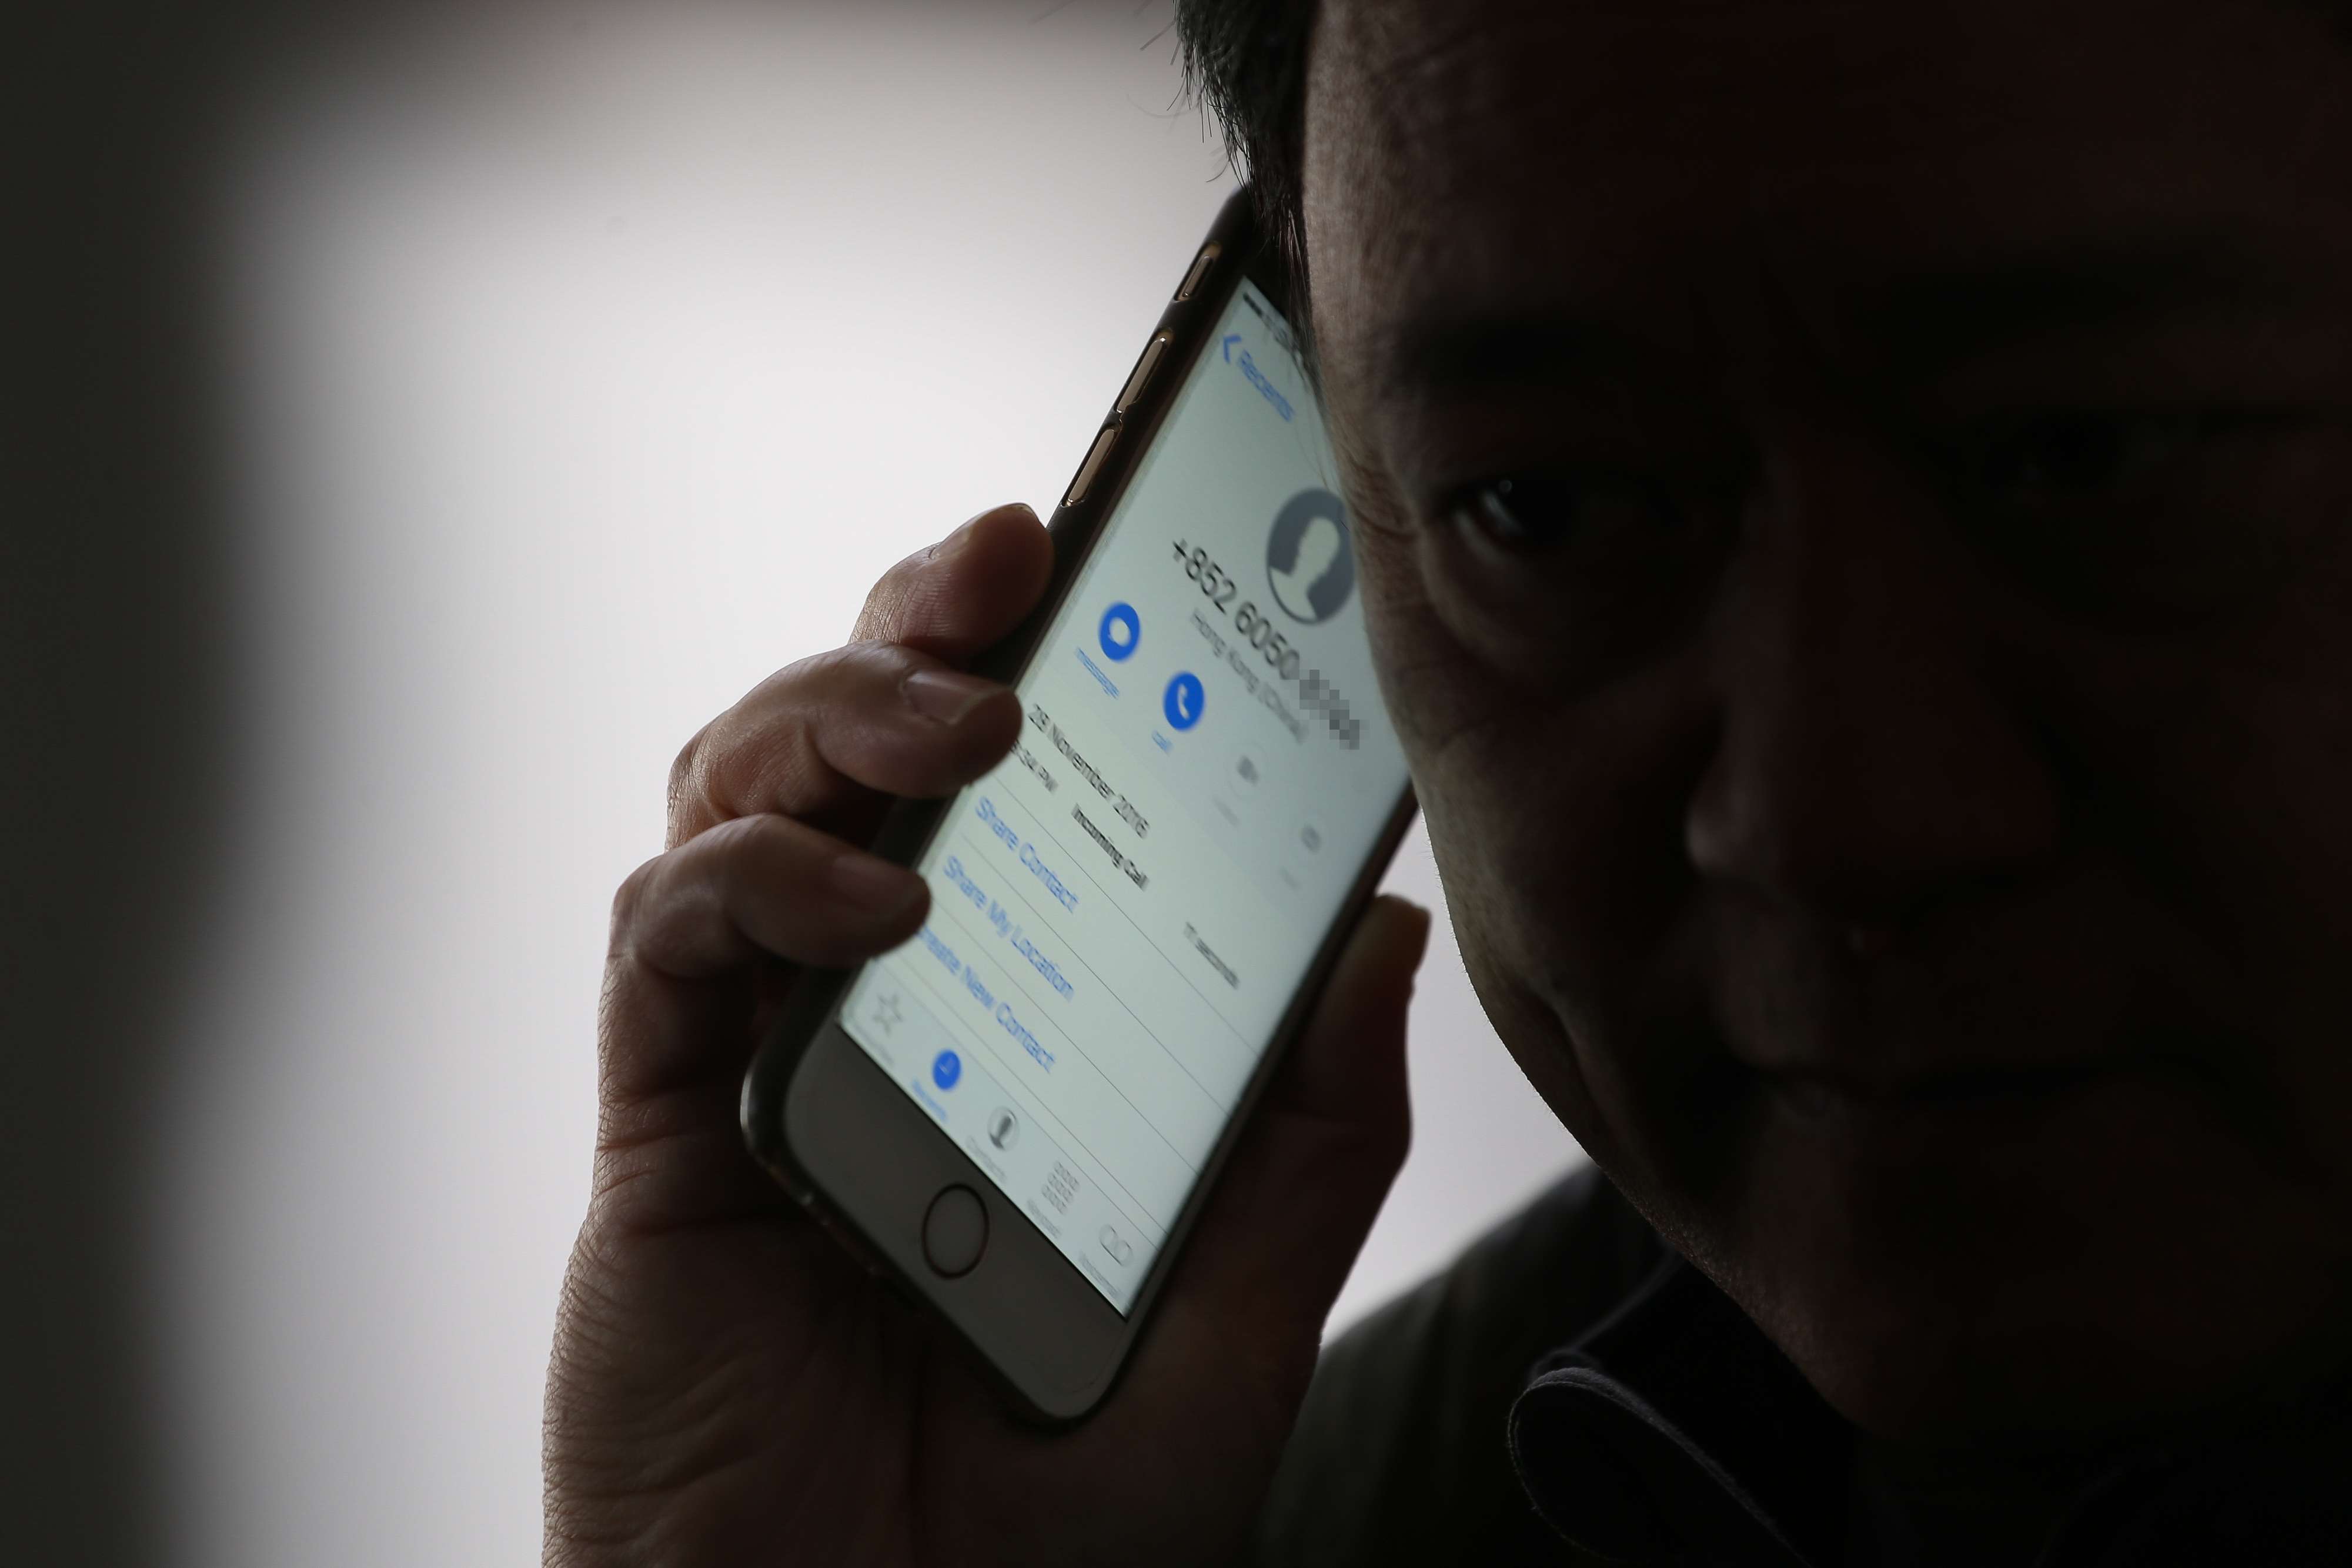 How to deal with cold-callers in Hong Kong | South China ... - 